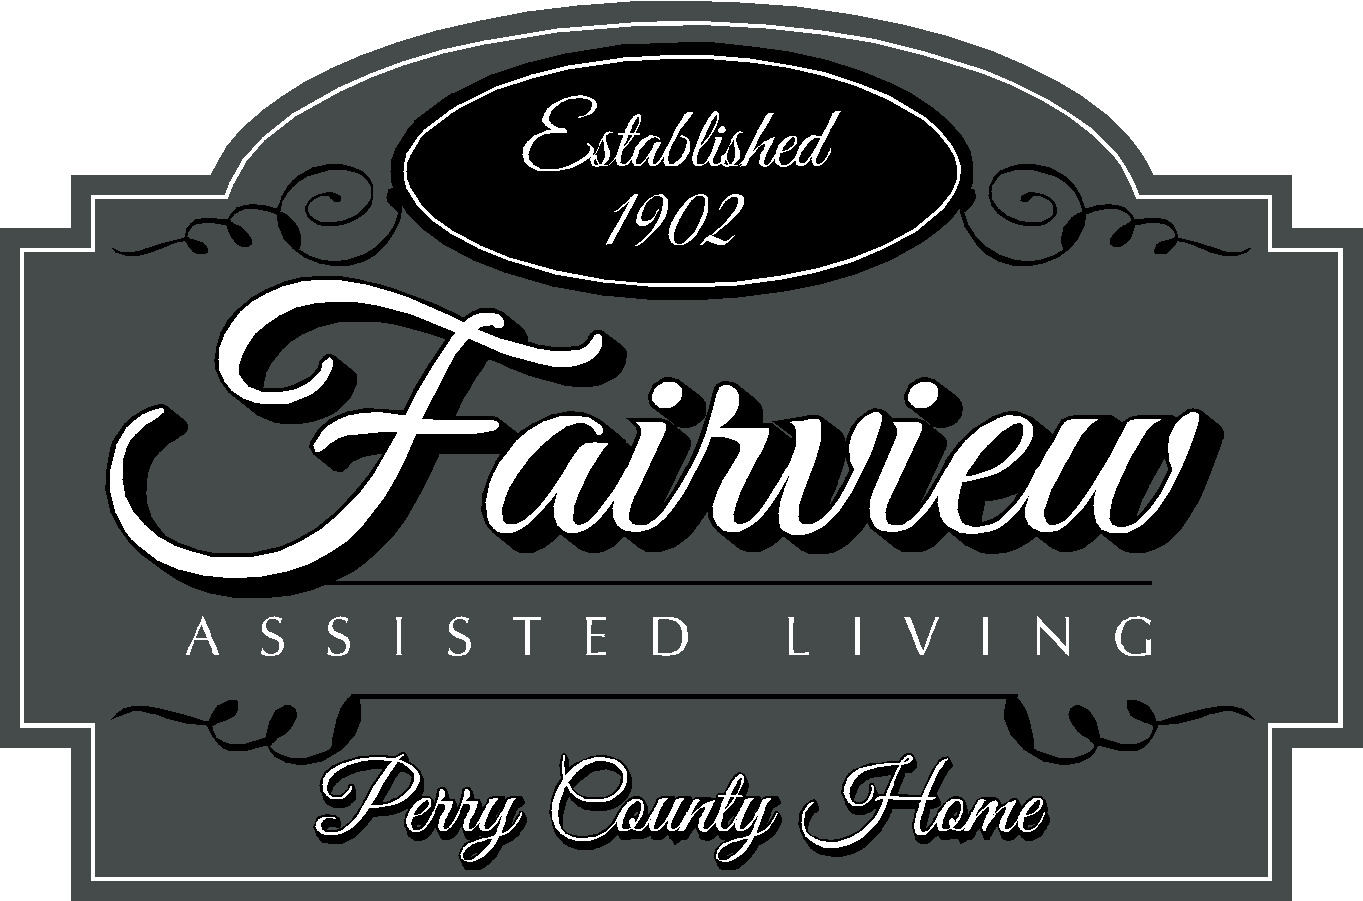 Fairview Assisted Living Accepting Applications for Residency